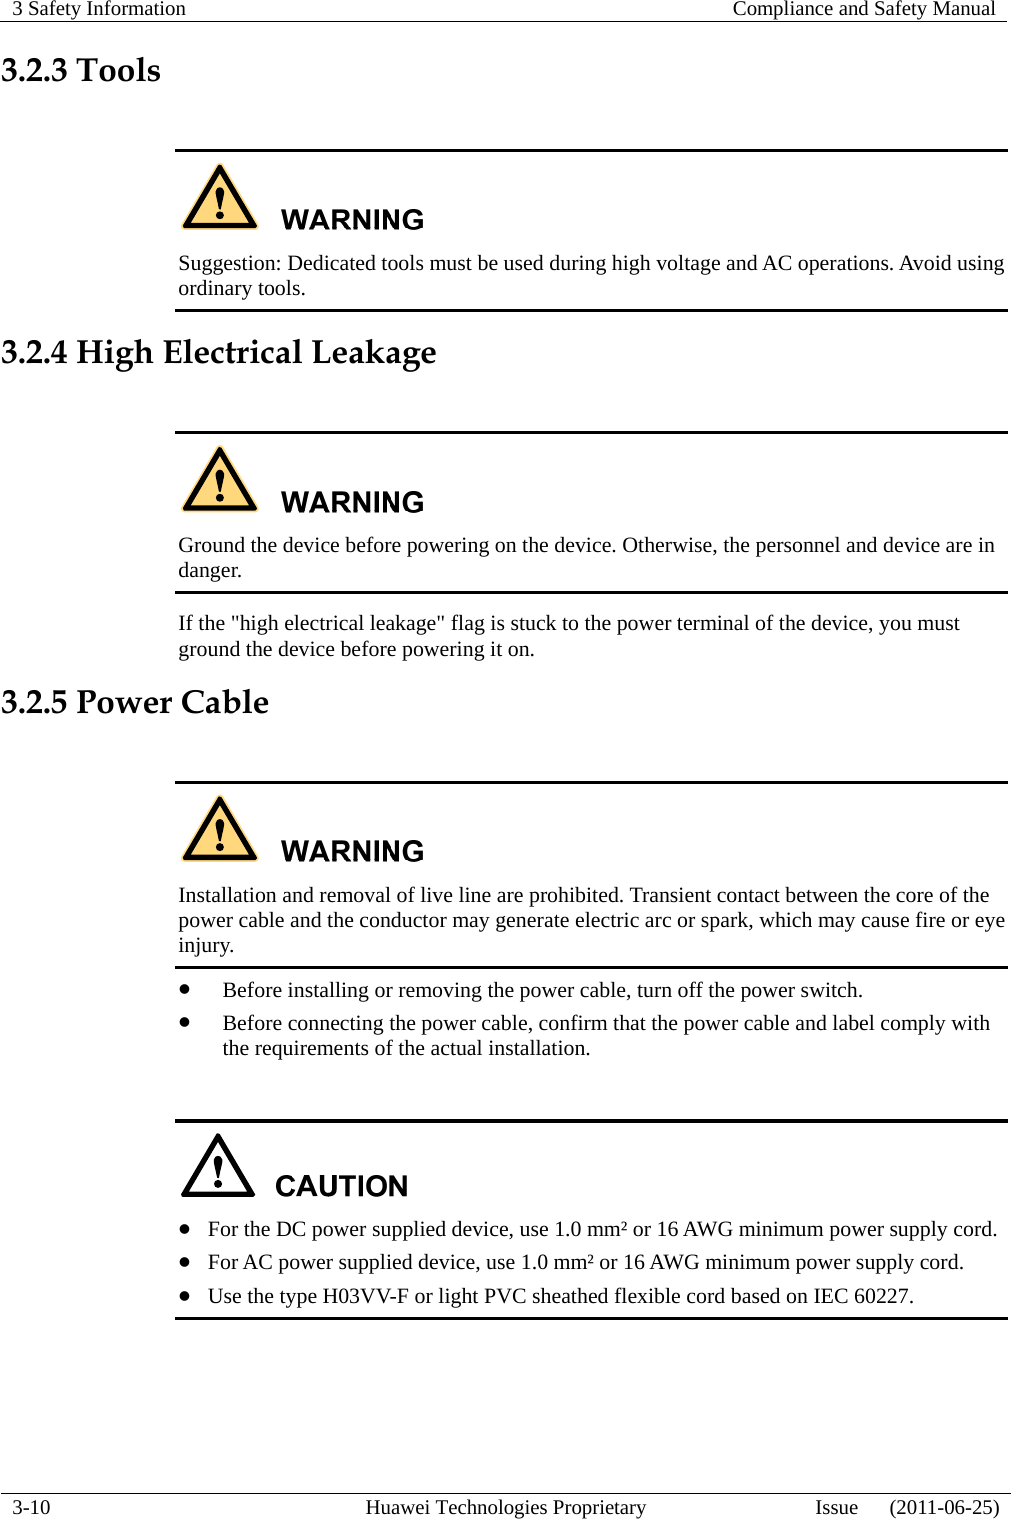 3 Safety Information   Compliance and Safety Manual  3-10  Huawei Technologies Proprietary  Issue      (2011-06-25) 3.2.3 Tools   Suggestion: Dedicated tools must be used during high voltage and AC operations. Avoid using ordinary tools. 3.2.4 High Electrical Leakage   Ground the device before powering on the device. Otherwise, the personnel and device are in danger. If the &quot;high electrical leakage&quot; flag is stuck to the power terminal of the device, you must ground the device before powering it on. 3.2.5 Power Cable   Installation and removal of live line are prohibited. Transient contact between the core of the power cable and the conductor may generate electric arc or spark, which may cause fire or eye injury. z Before installing or removing the power cable, turn off the power switch. z Before connecting the power cable, confirm that the power cable and label comply with the requirements of the actual installation.   z For the DC power supplied device, use 1.0 mm² or 16 AWG minimum power supply cord. z For AC power supplied device, use 1.0 mm² or 16 AWG minimum power supply cord. z Use the type H03VV-F or light PVC sheathed flexible cord based on IEC 60227.  